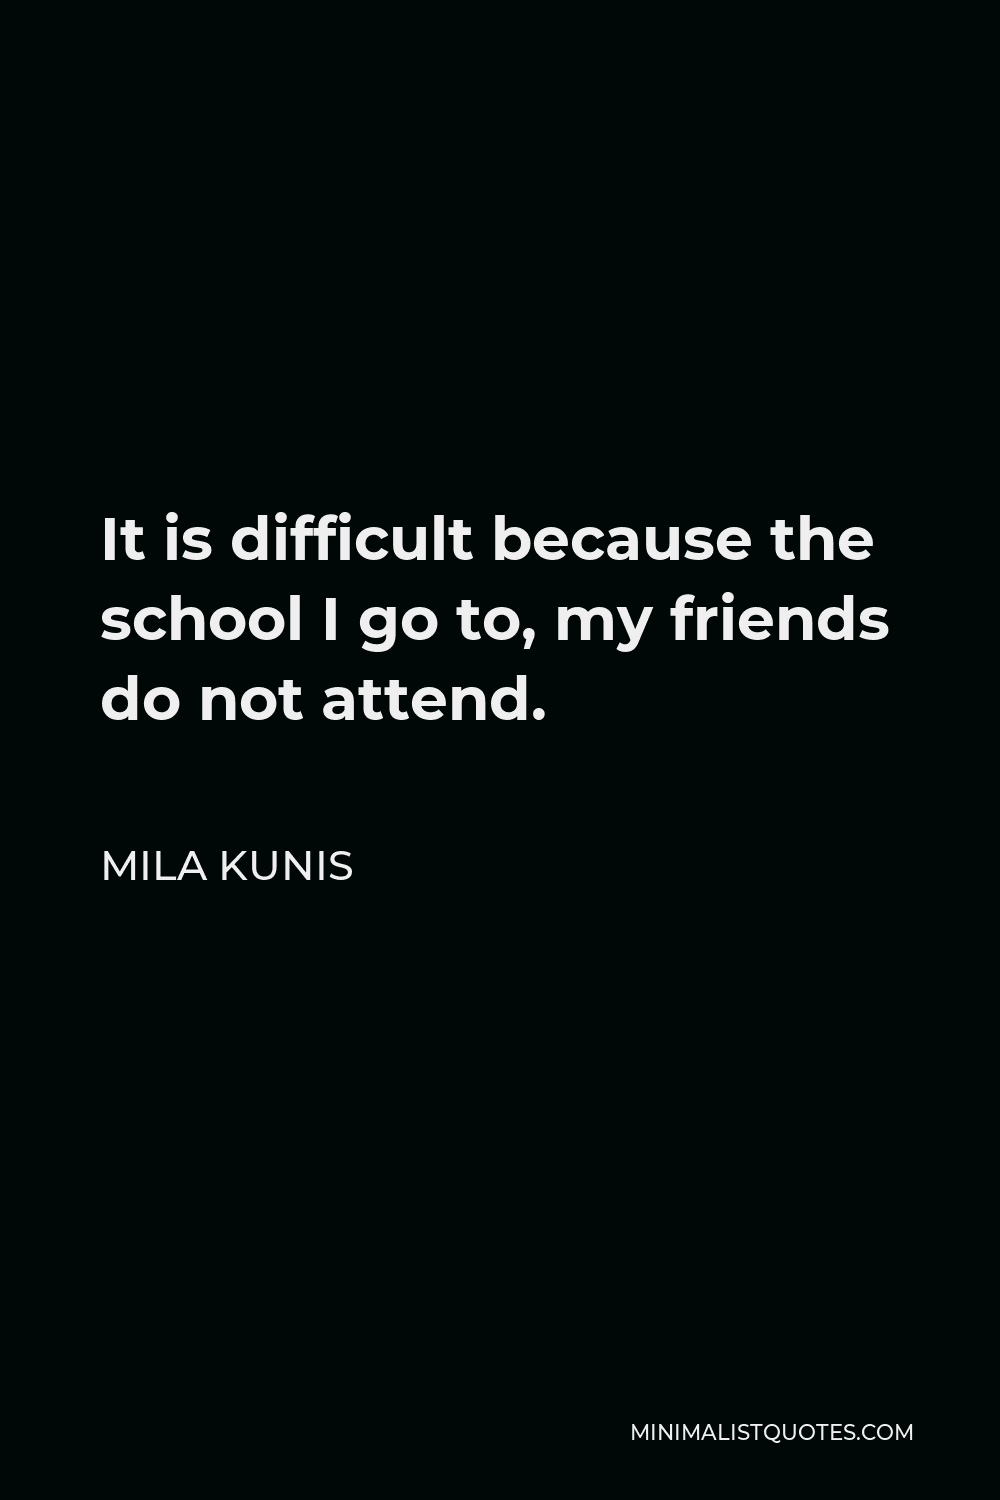 Mila Kunis Quote - It is difficult because the school I go to, my friends do not attend.